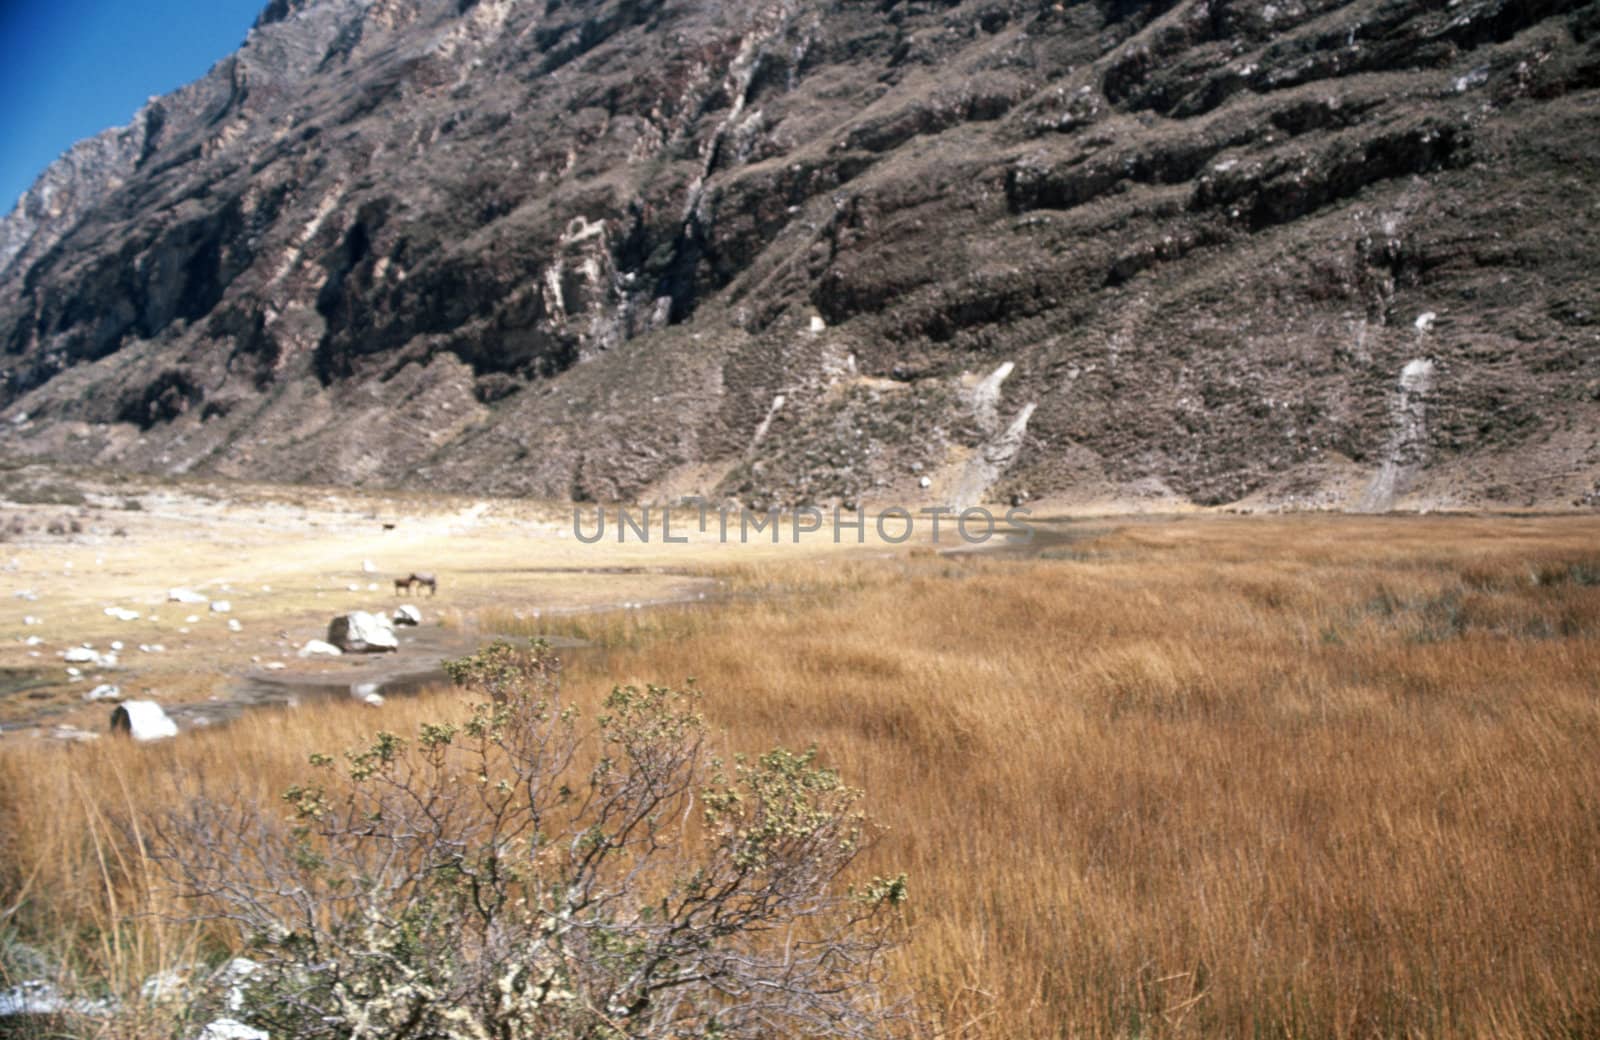 Withered field by a stony abrupt mountain, in Peru, South America